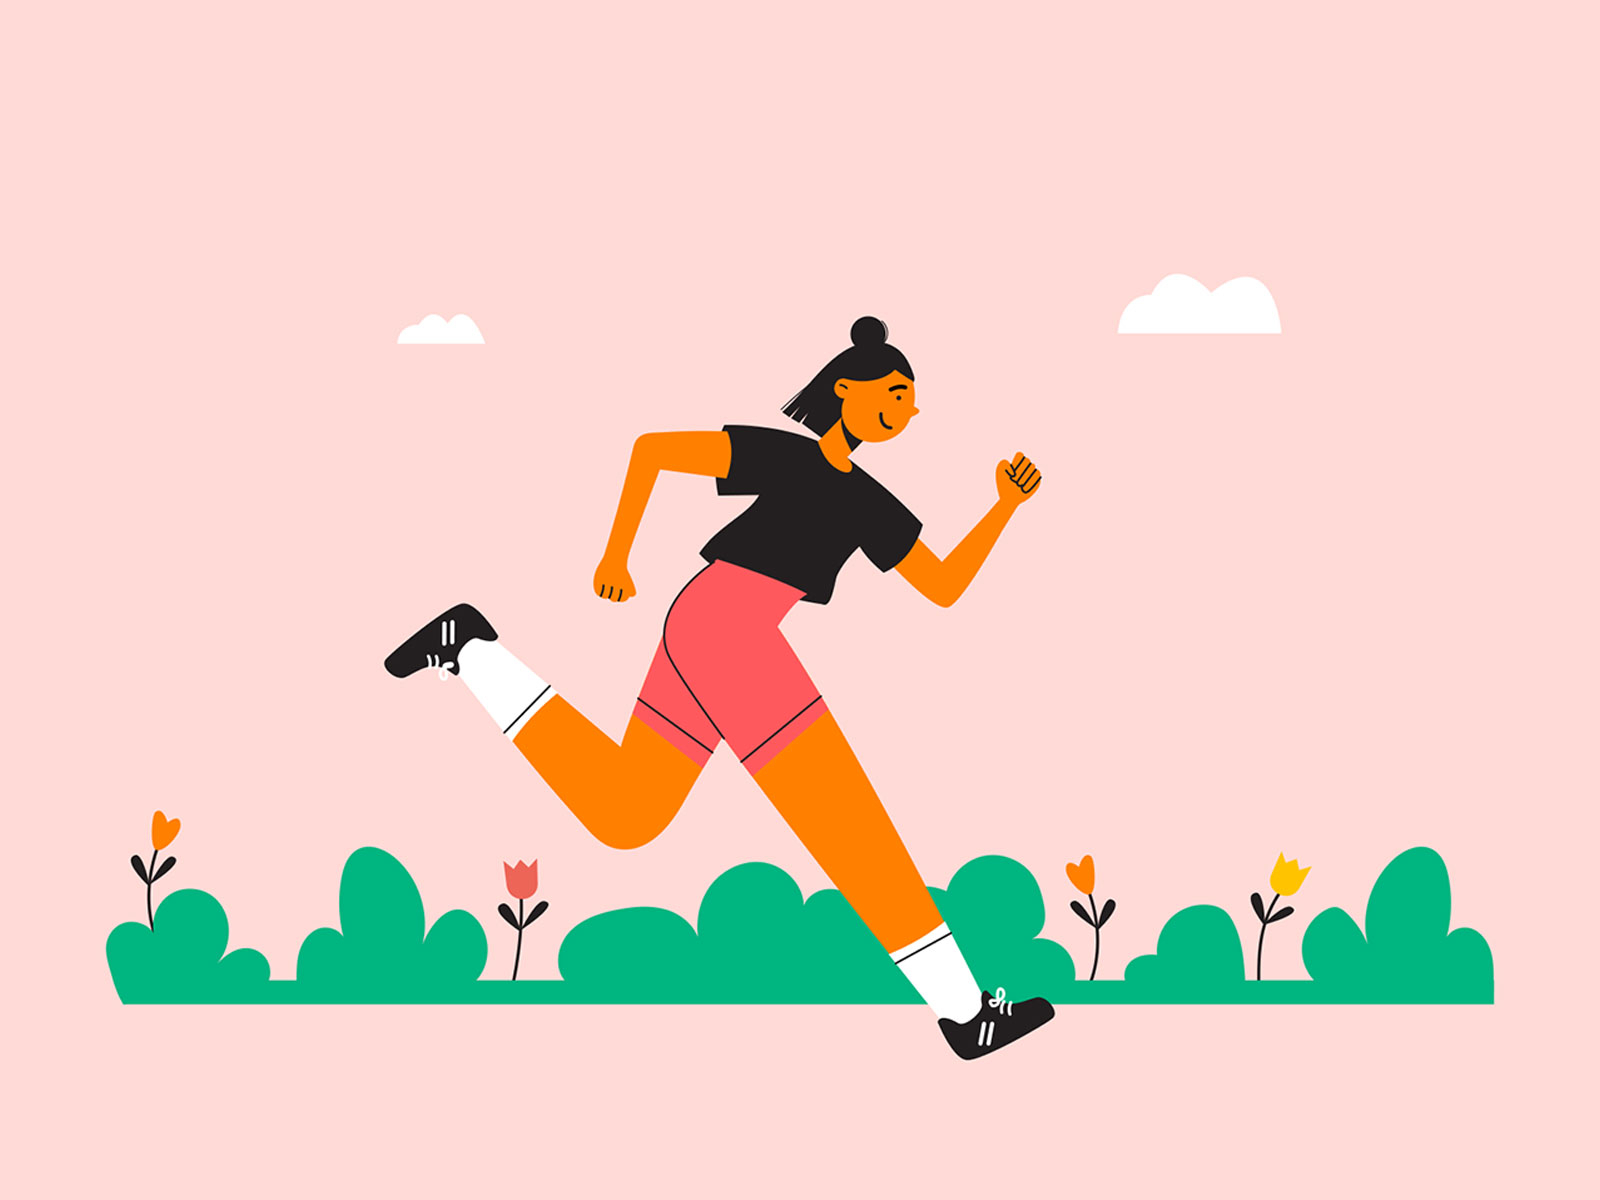 Girl Running Illustration by Duckleap on Dribbble